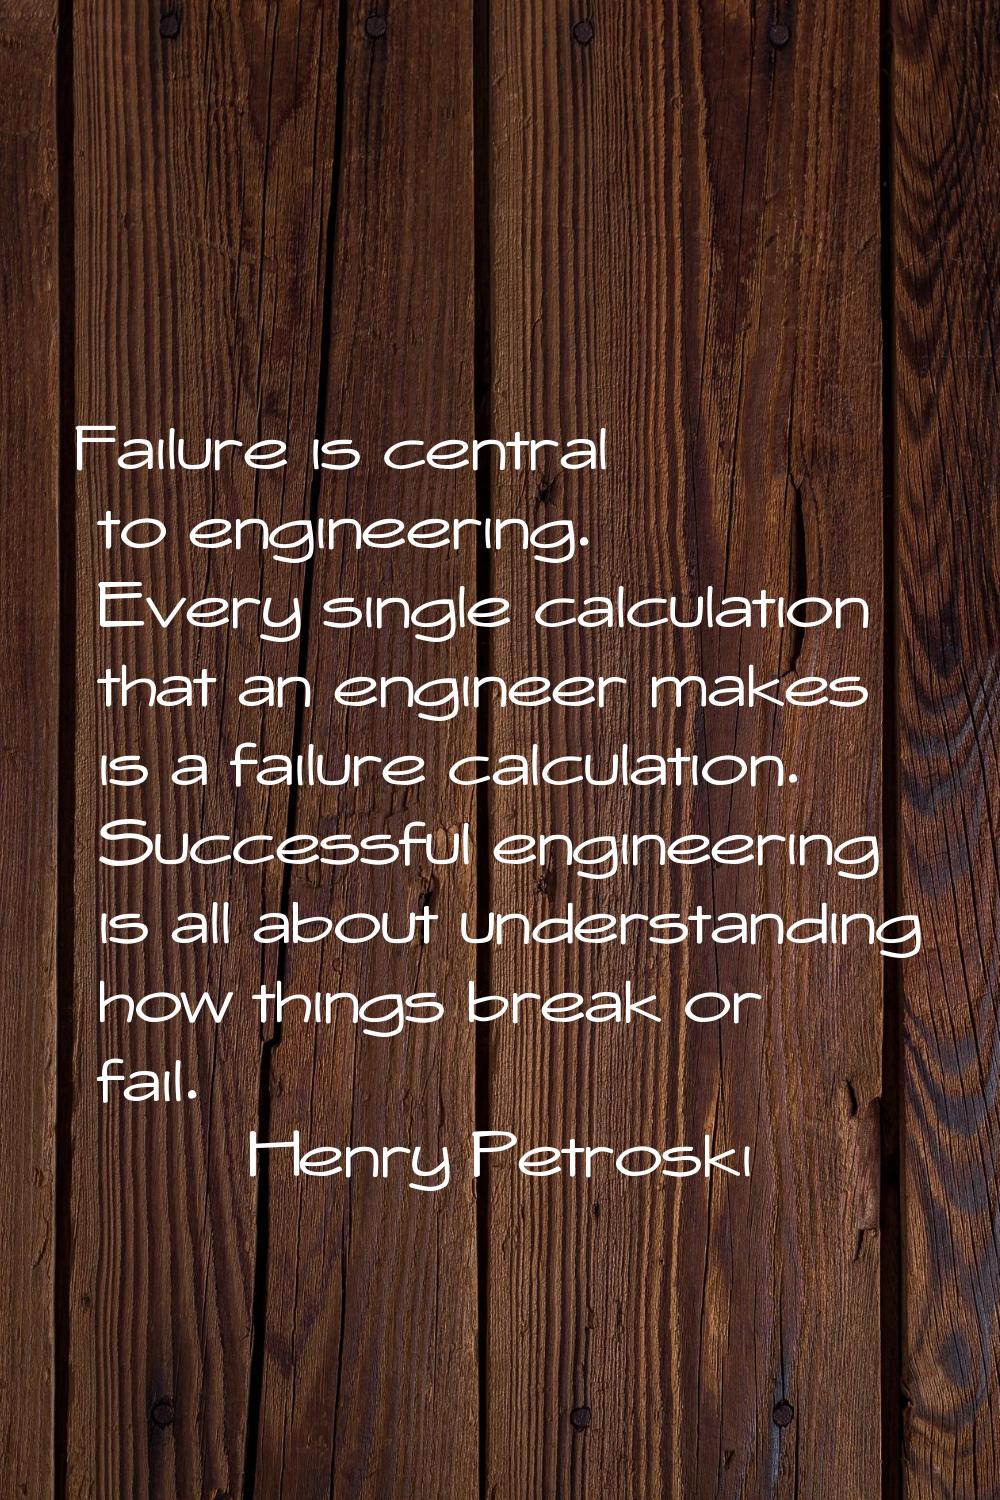 Failure is central to engineering. Every single calculation that an engineer makes is a failure cal